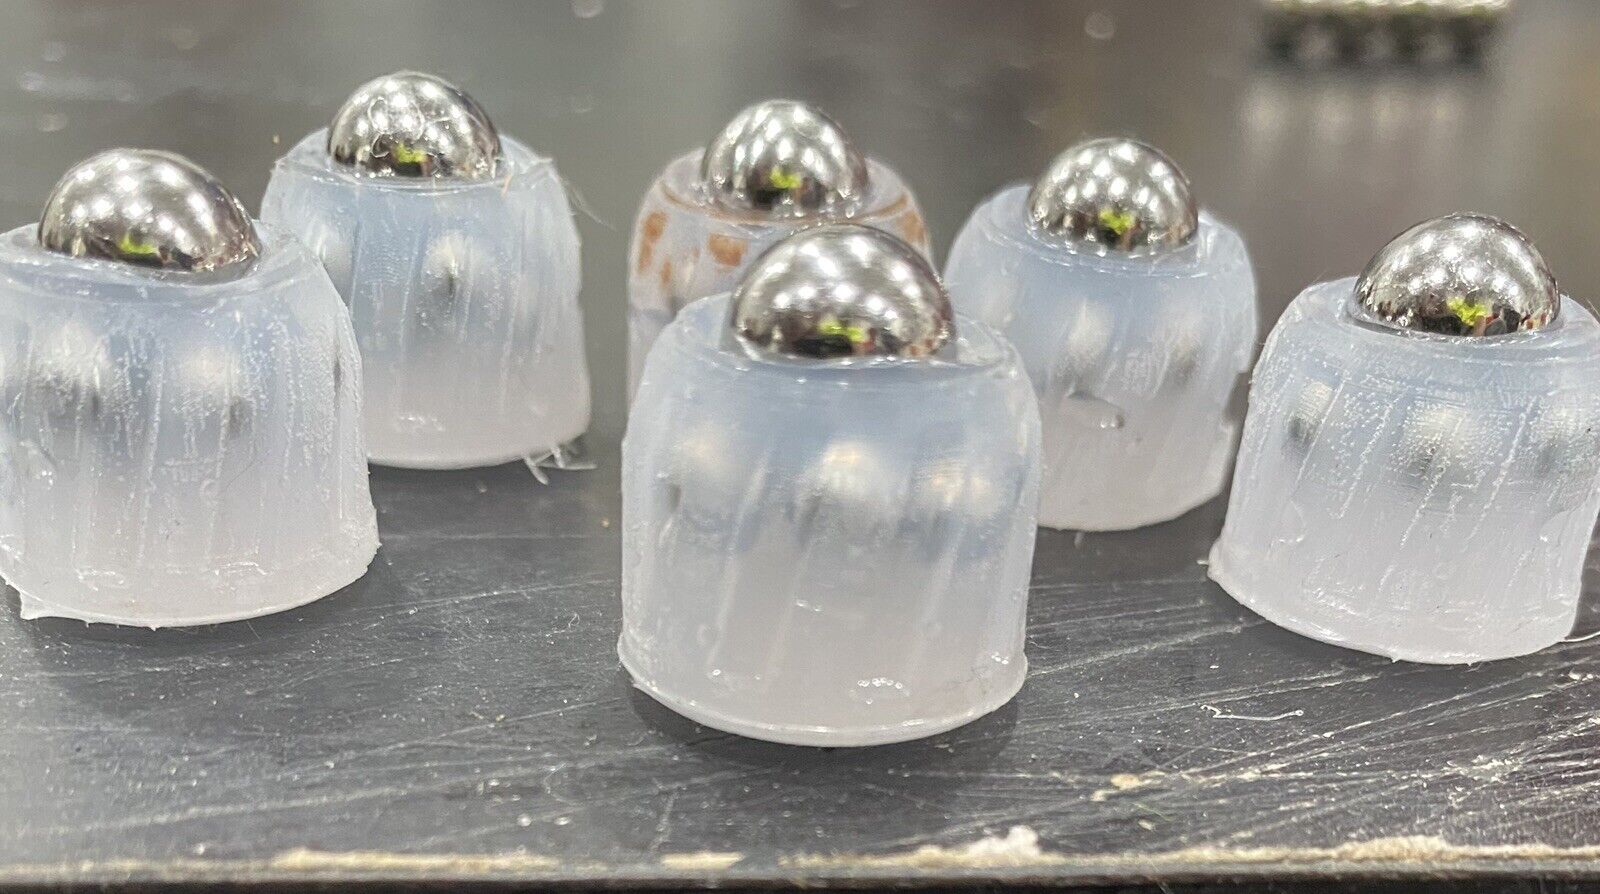 50 Count “Cyclops” Overseas parallel import regular item In Resin custom cal your slugs shipfree .68 made for